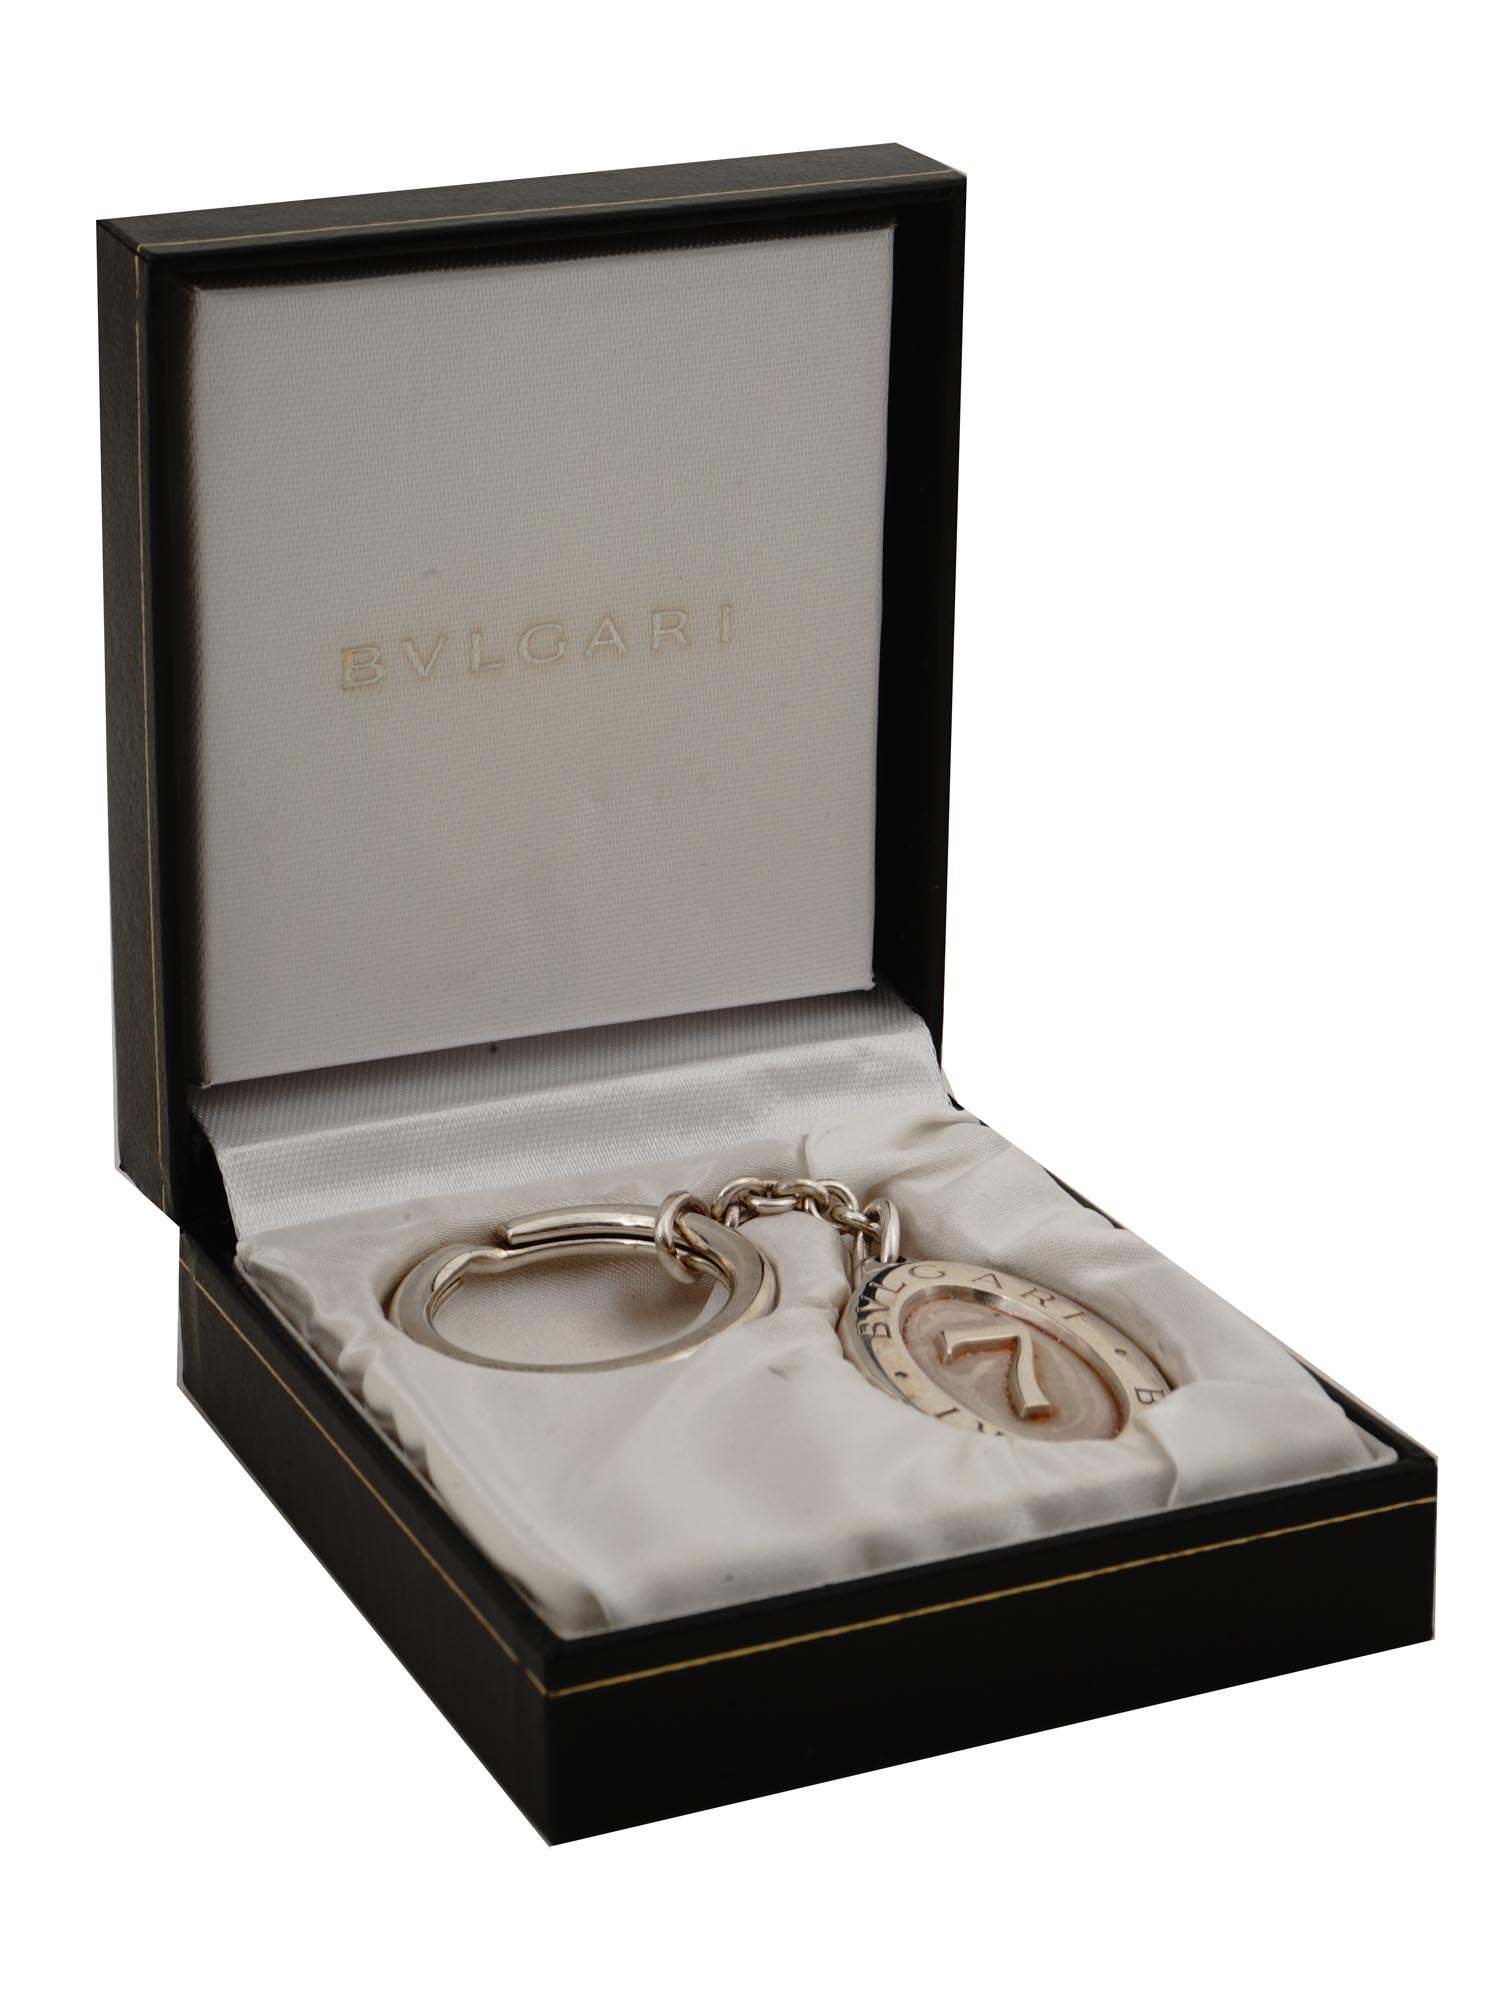 BVLGARI STERLING SILVER LUCKY SEVEN KEYCHAIN PIC-0